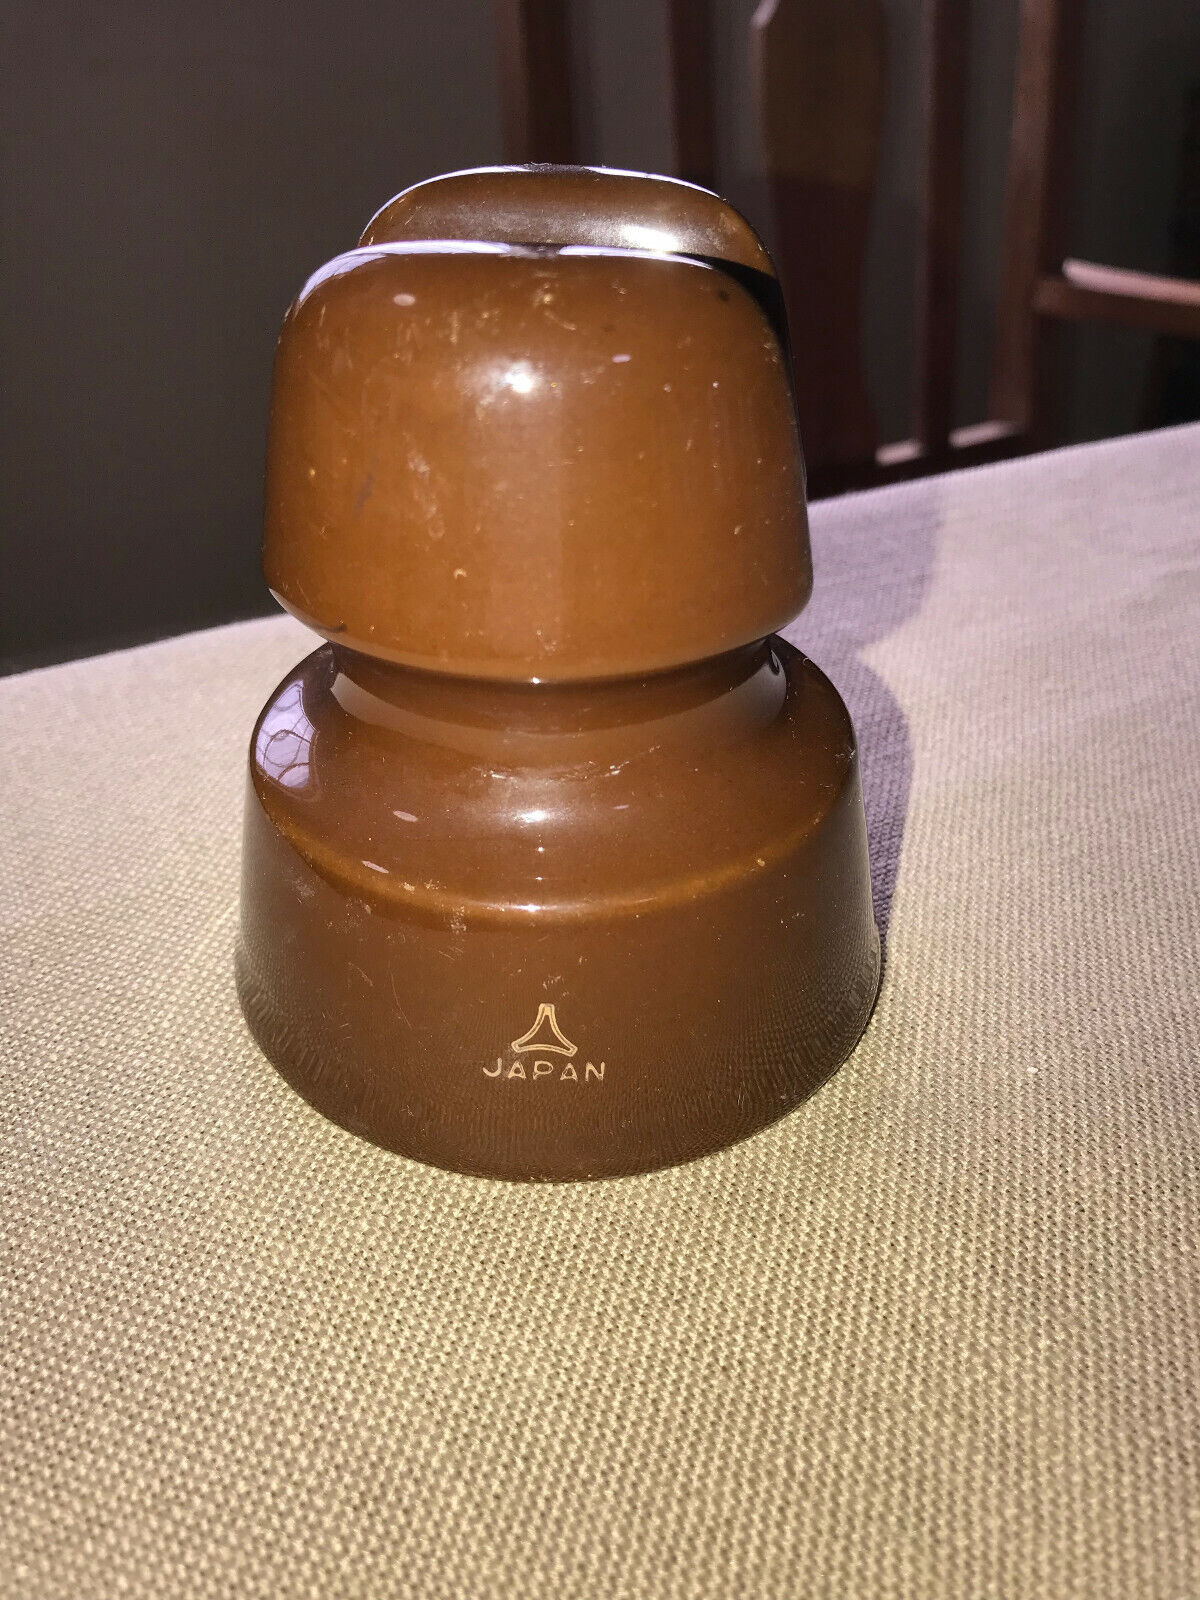 Vintage brown electric insulator from an Australian power pole - made in Japan